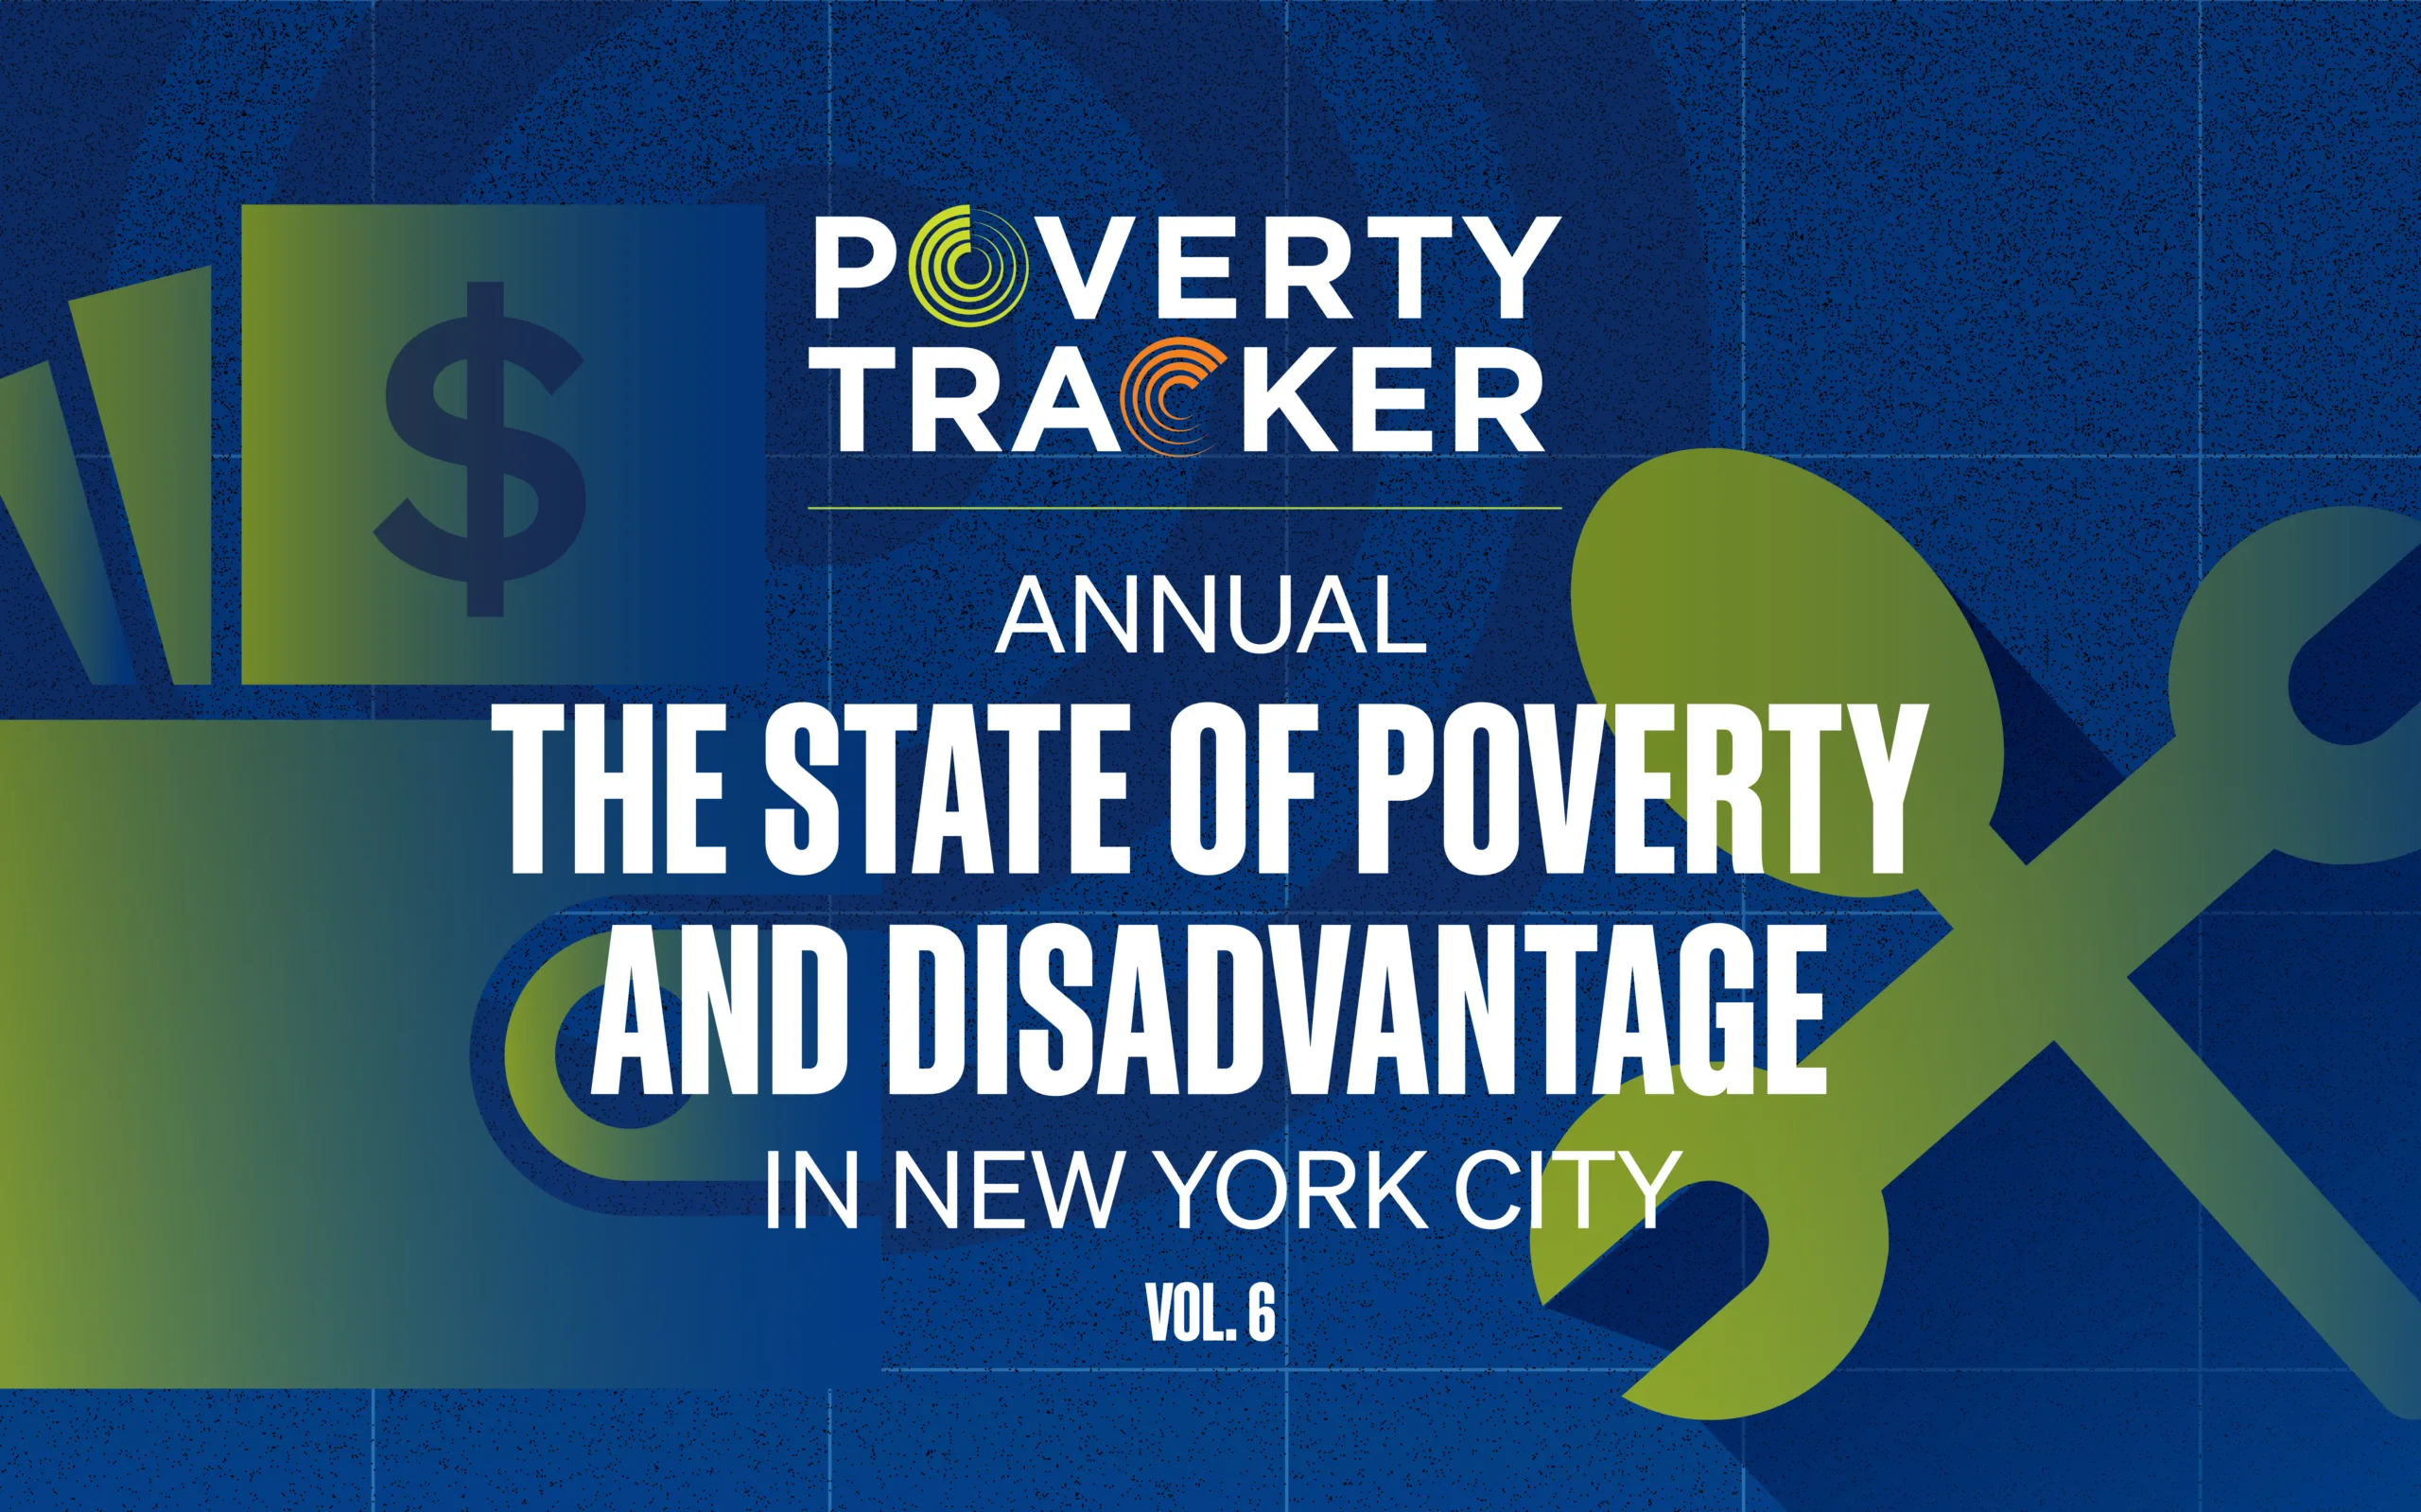 New Poverty Tracker Report Finds 2 Million New Yorkers Now Living in Poverty